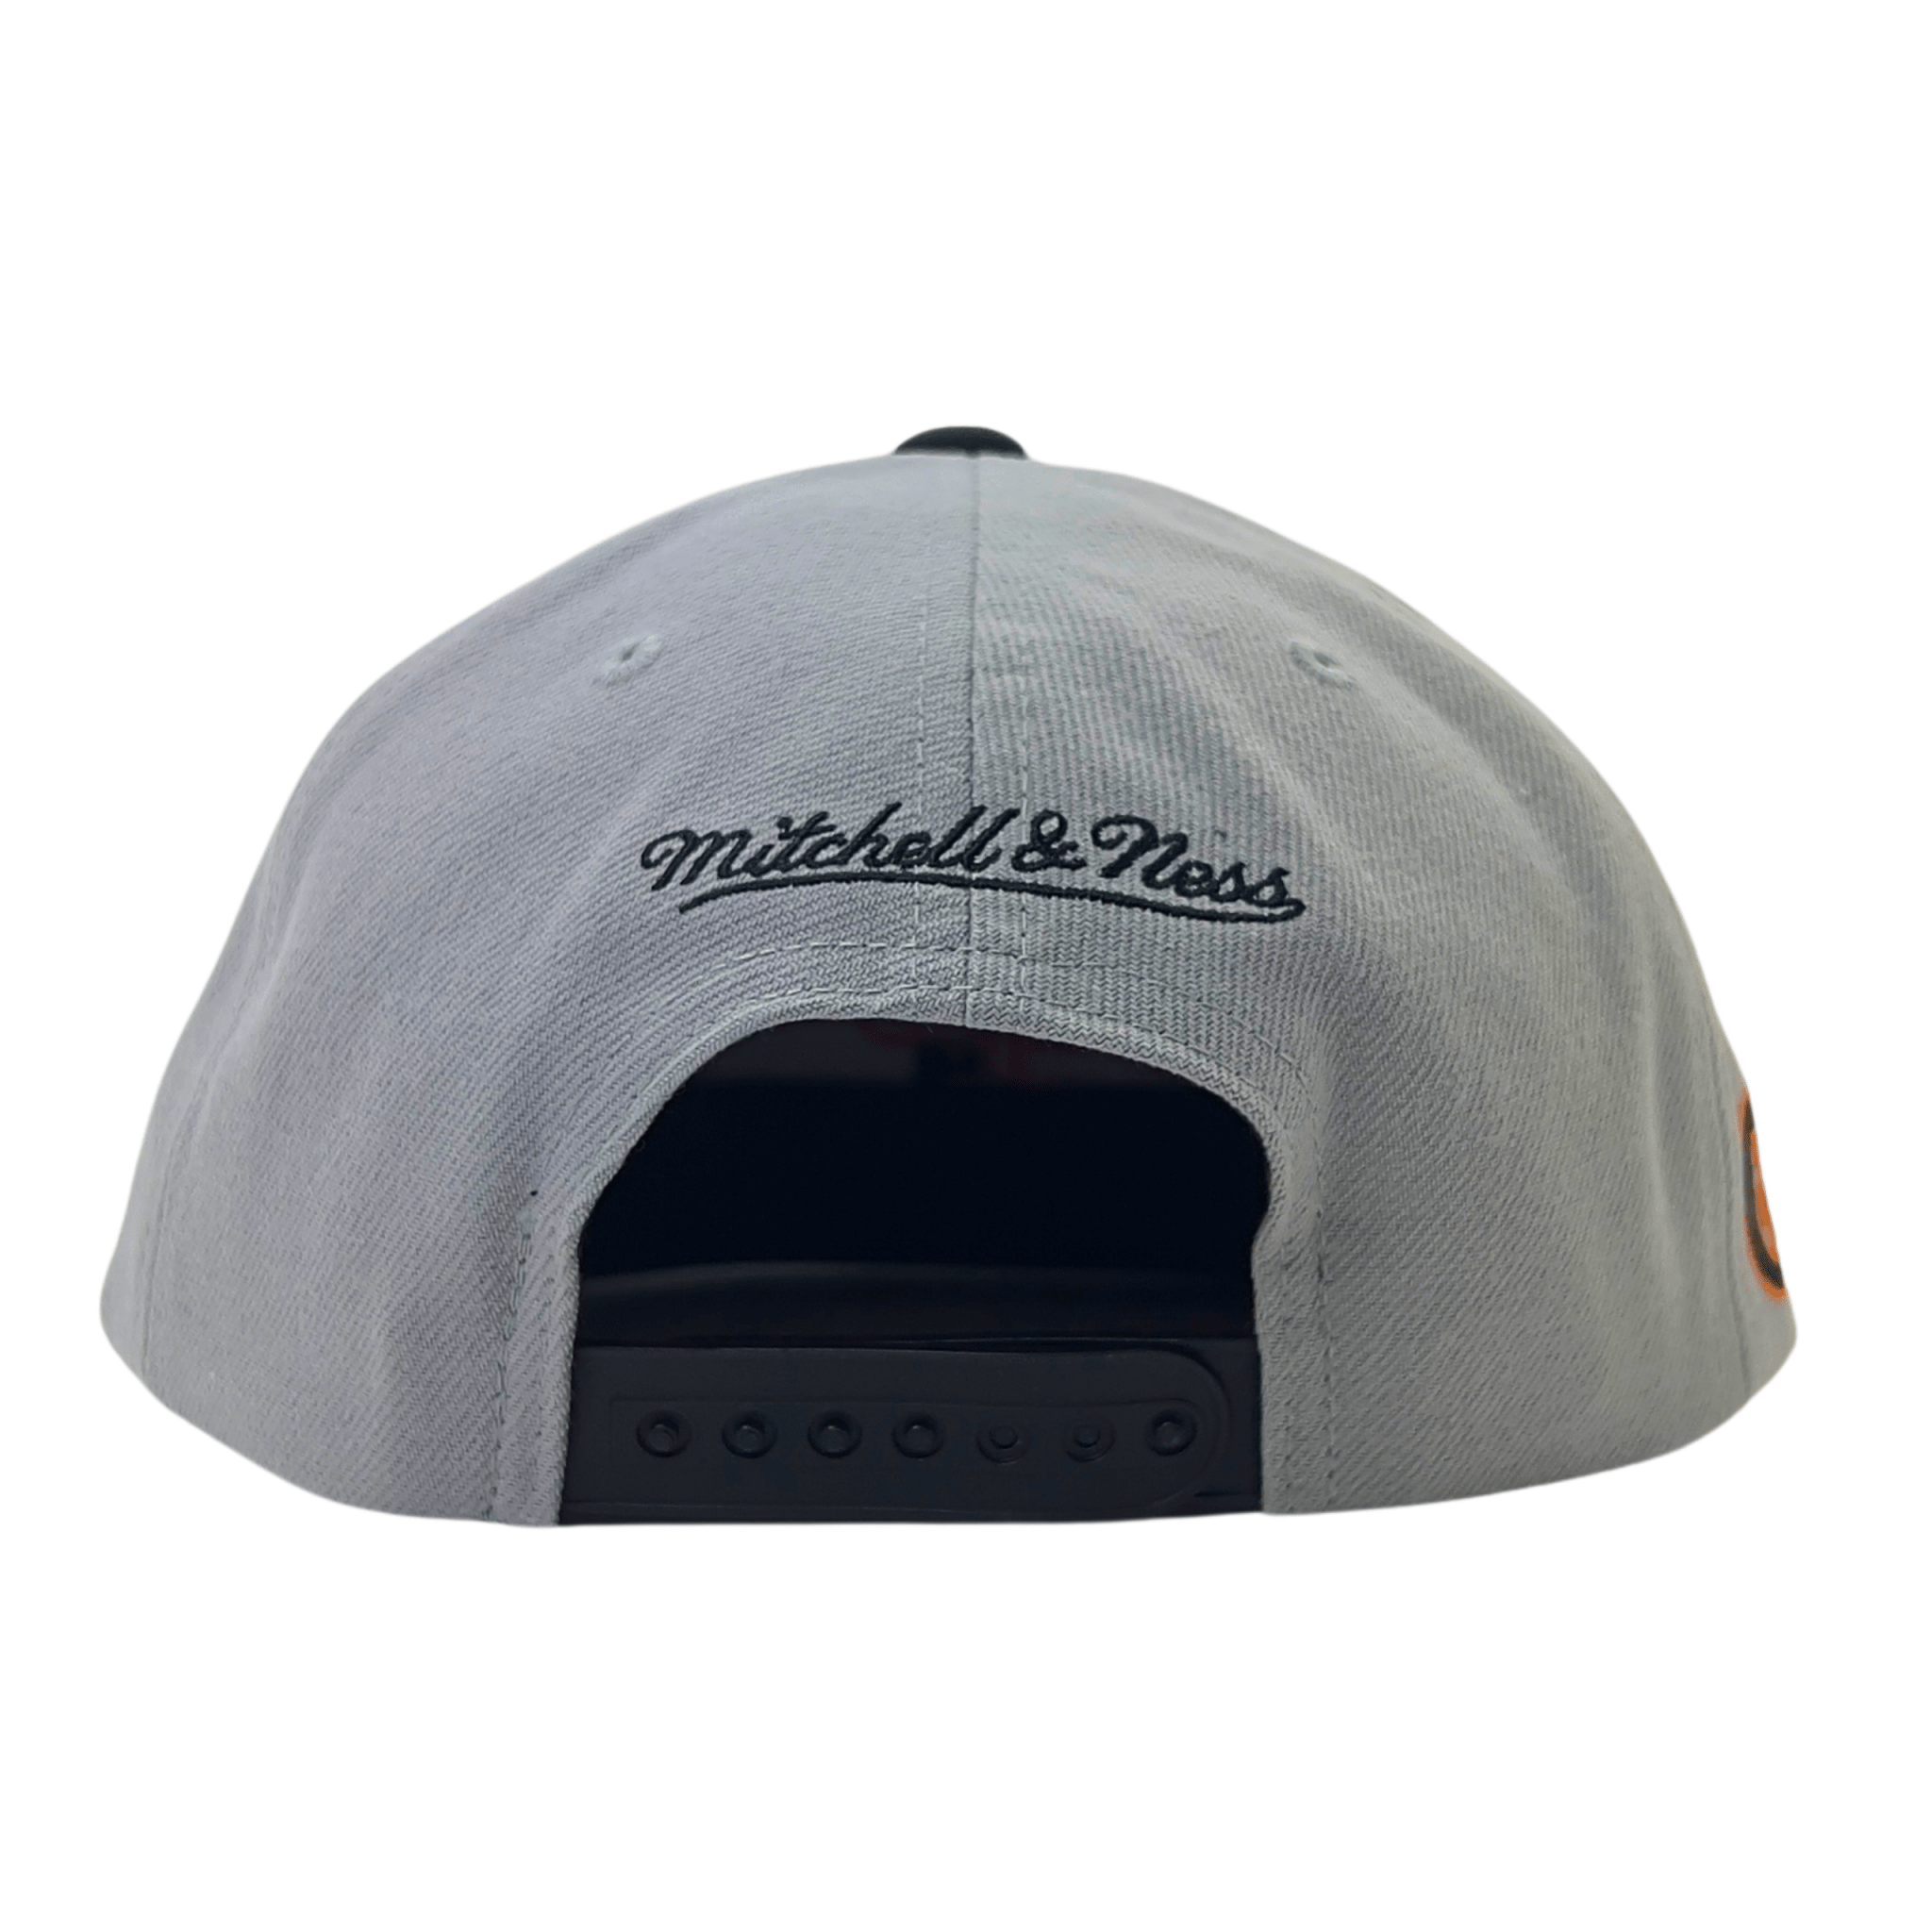 San Francisco Giants Away Cooperstown Snapback Hat in grey and black - Mitchell & Ness - State Of Flux